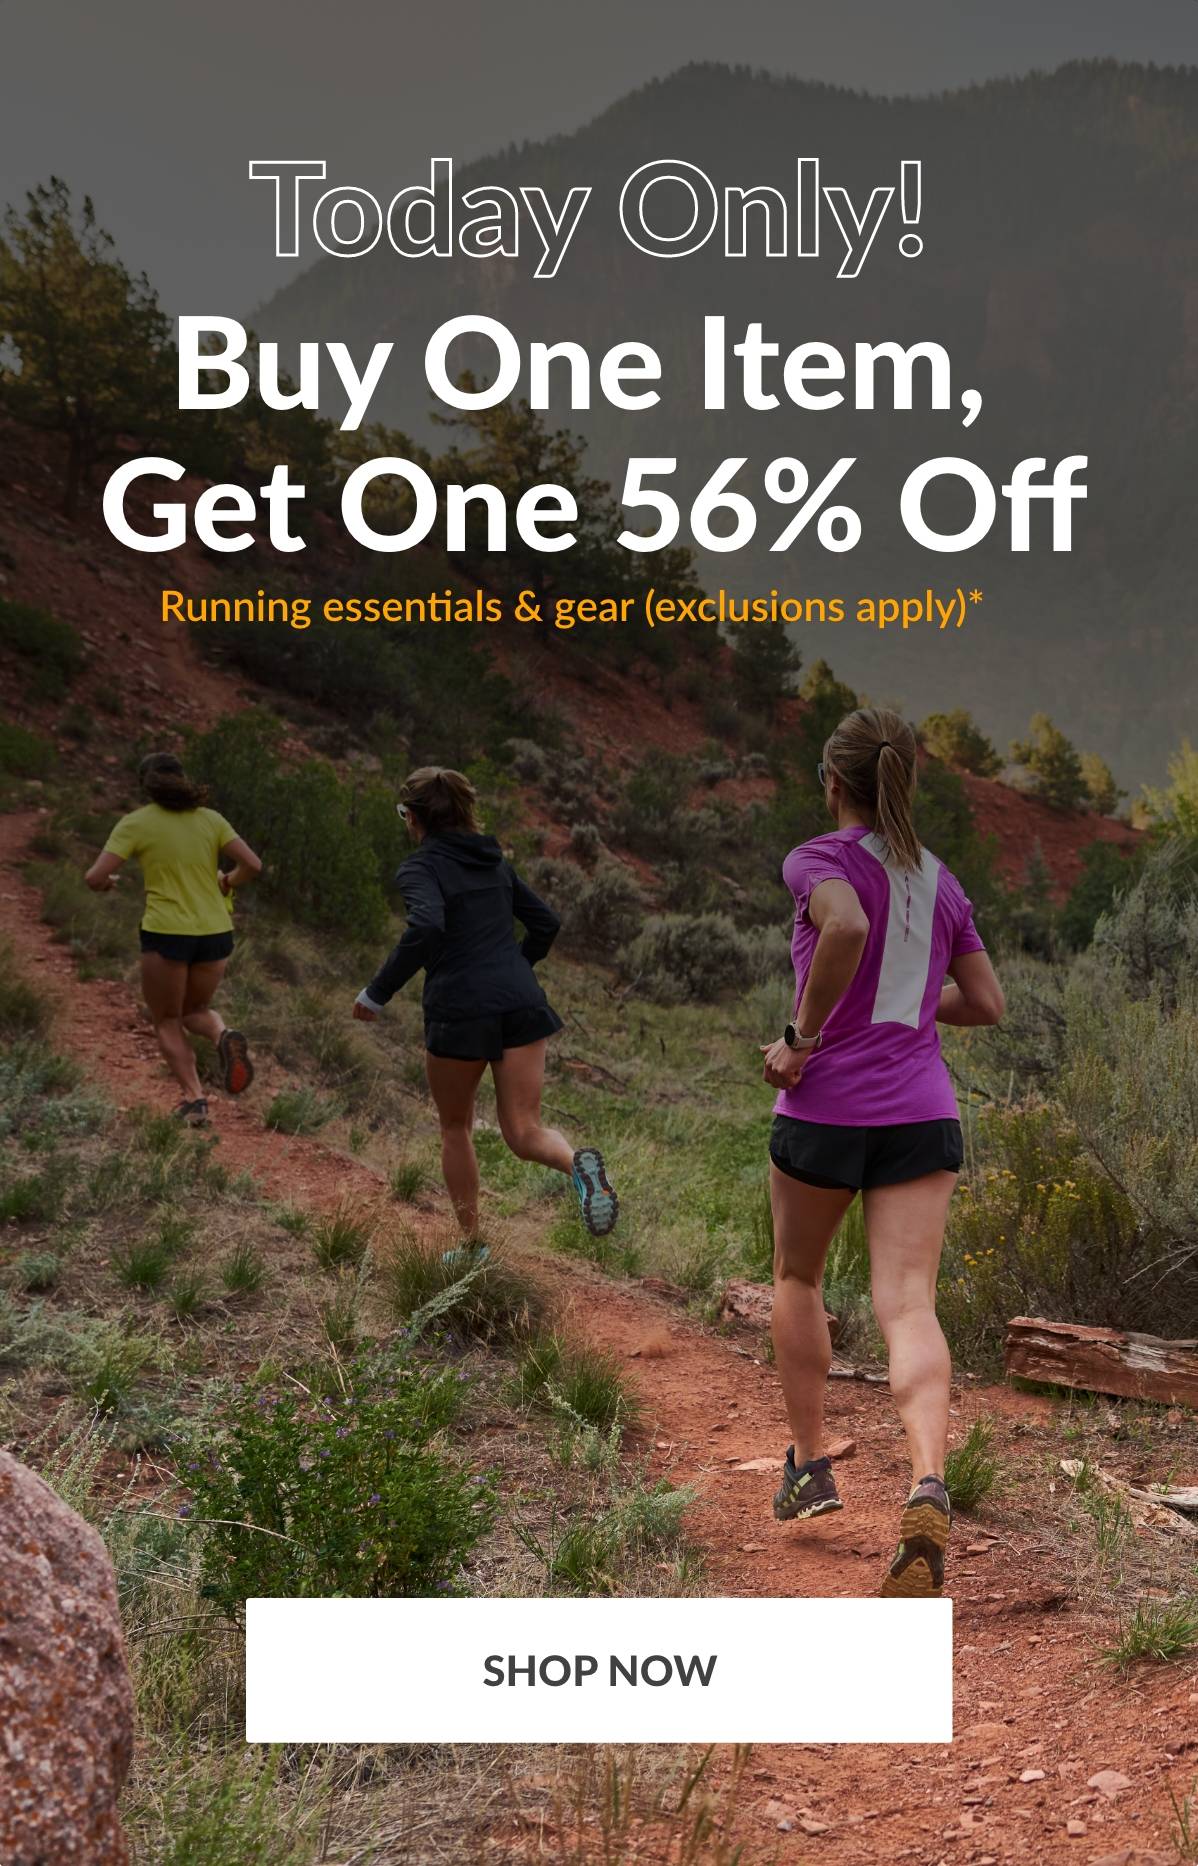 Today Only! Buy One Item, Get One 56% Off Running essentials & gear (exclusions apply)* SHOP NOW